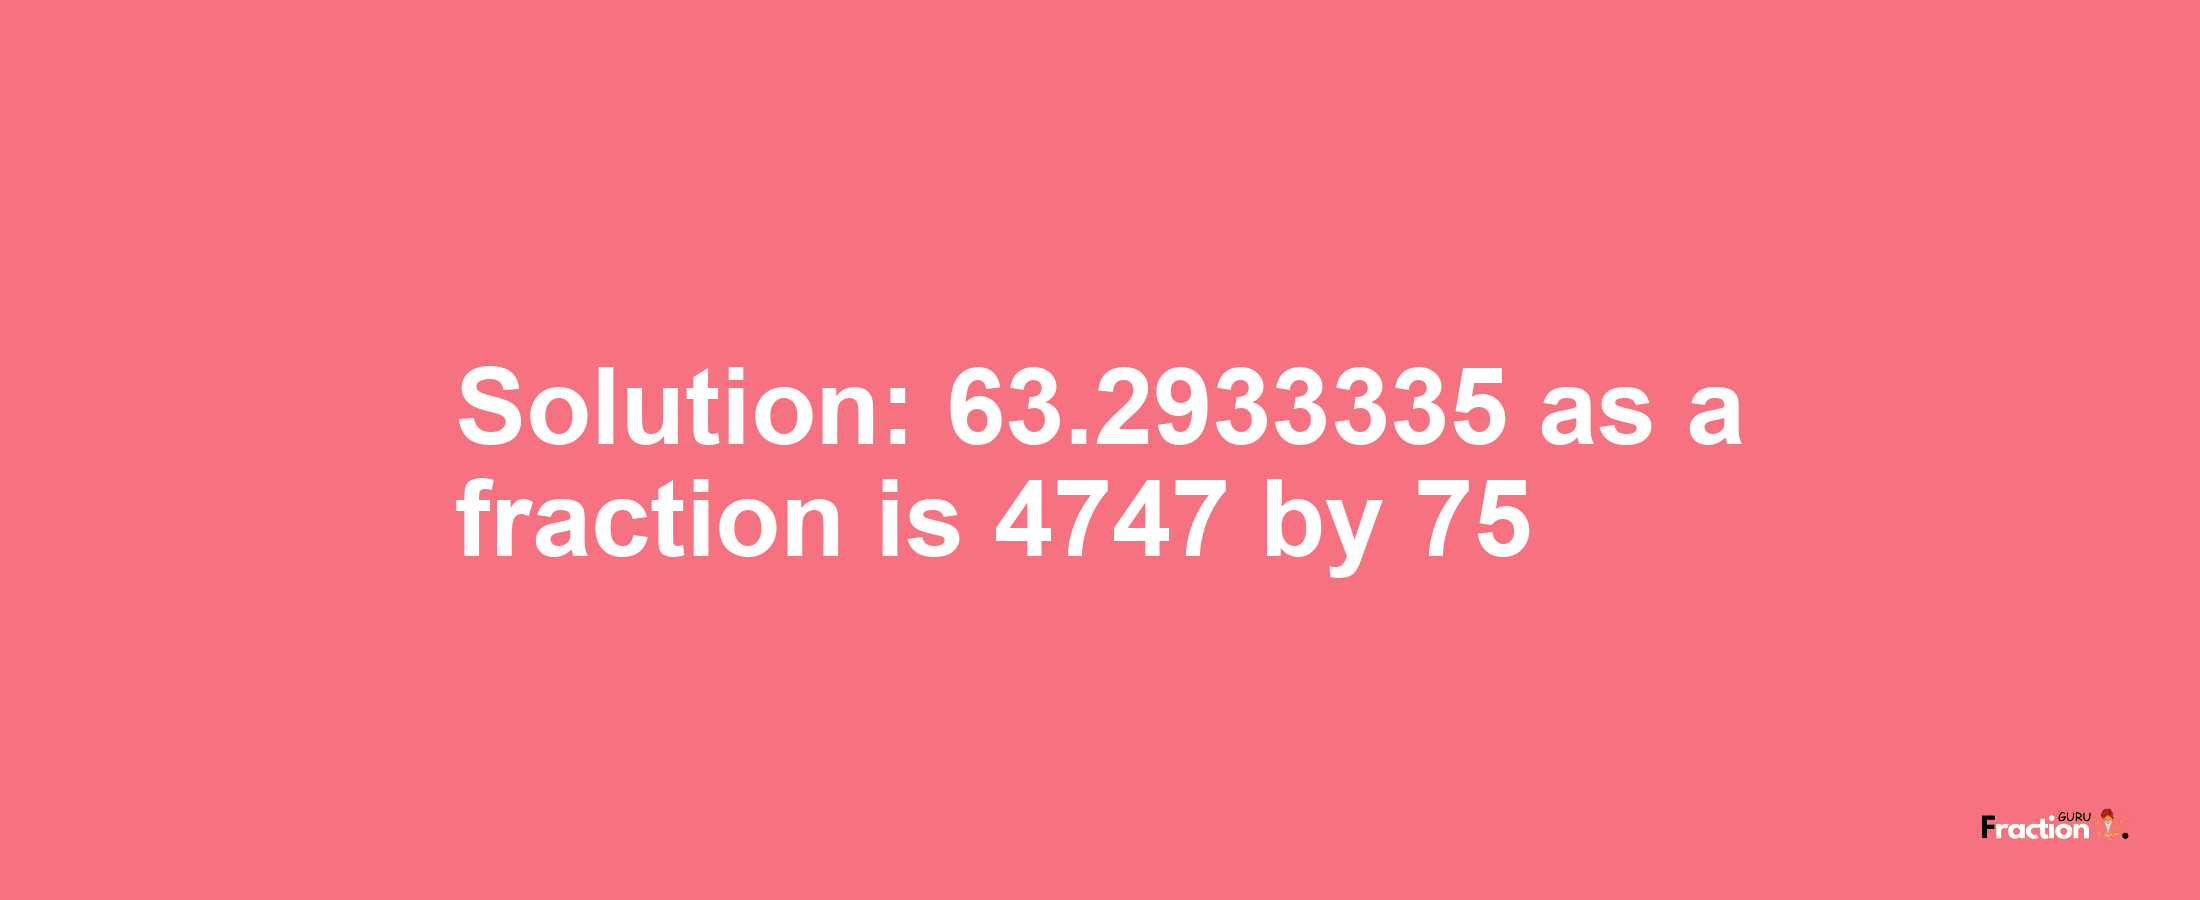 Solution:63.2933335 as a fraction is 4747/75